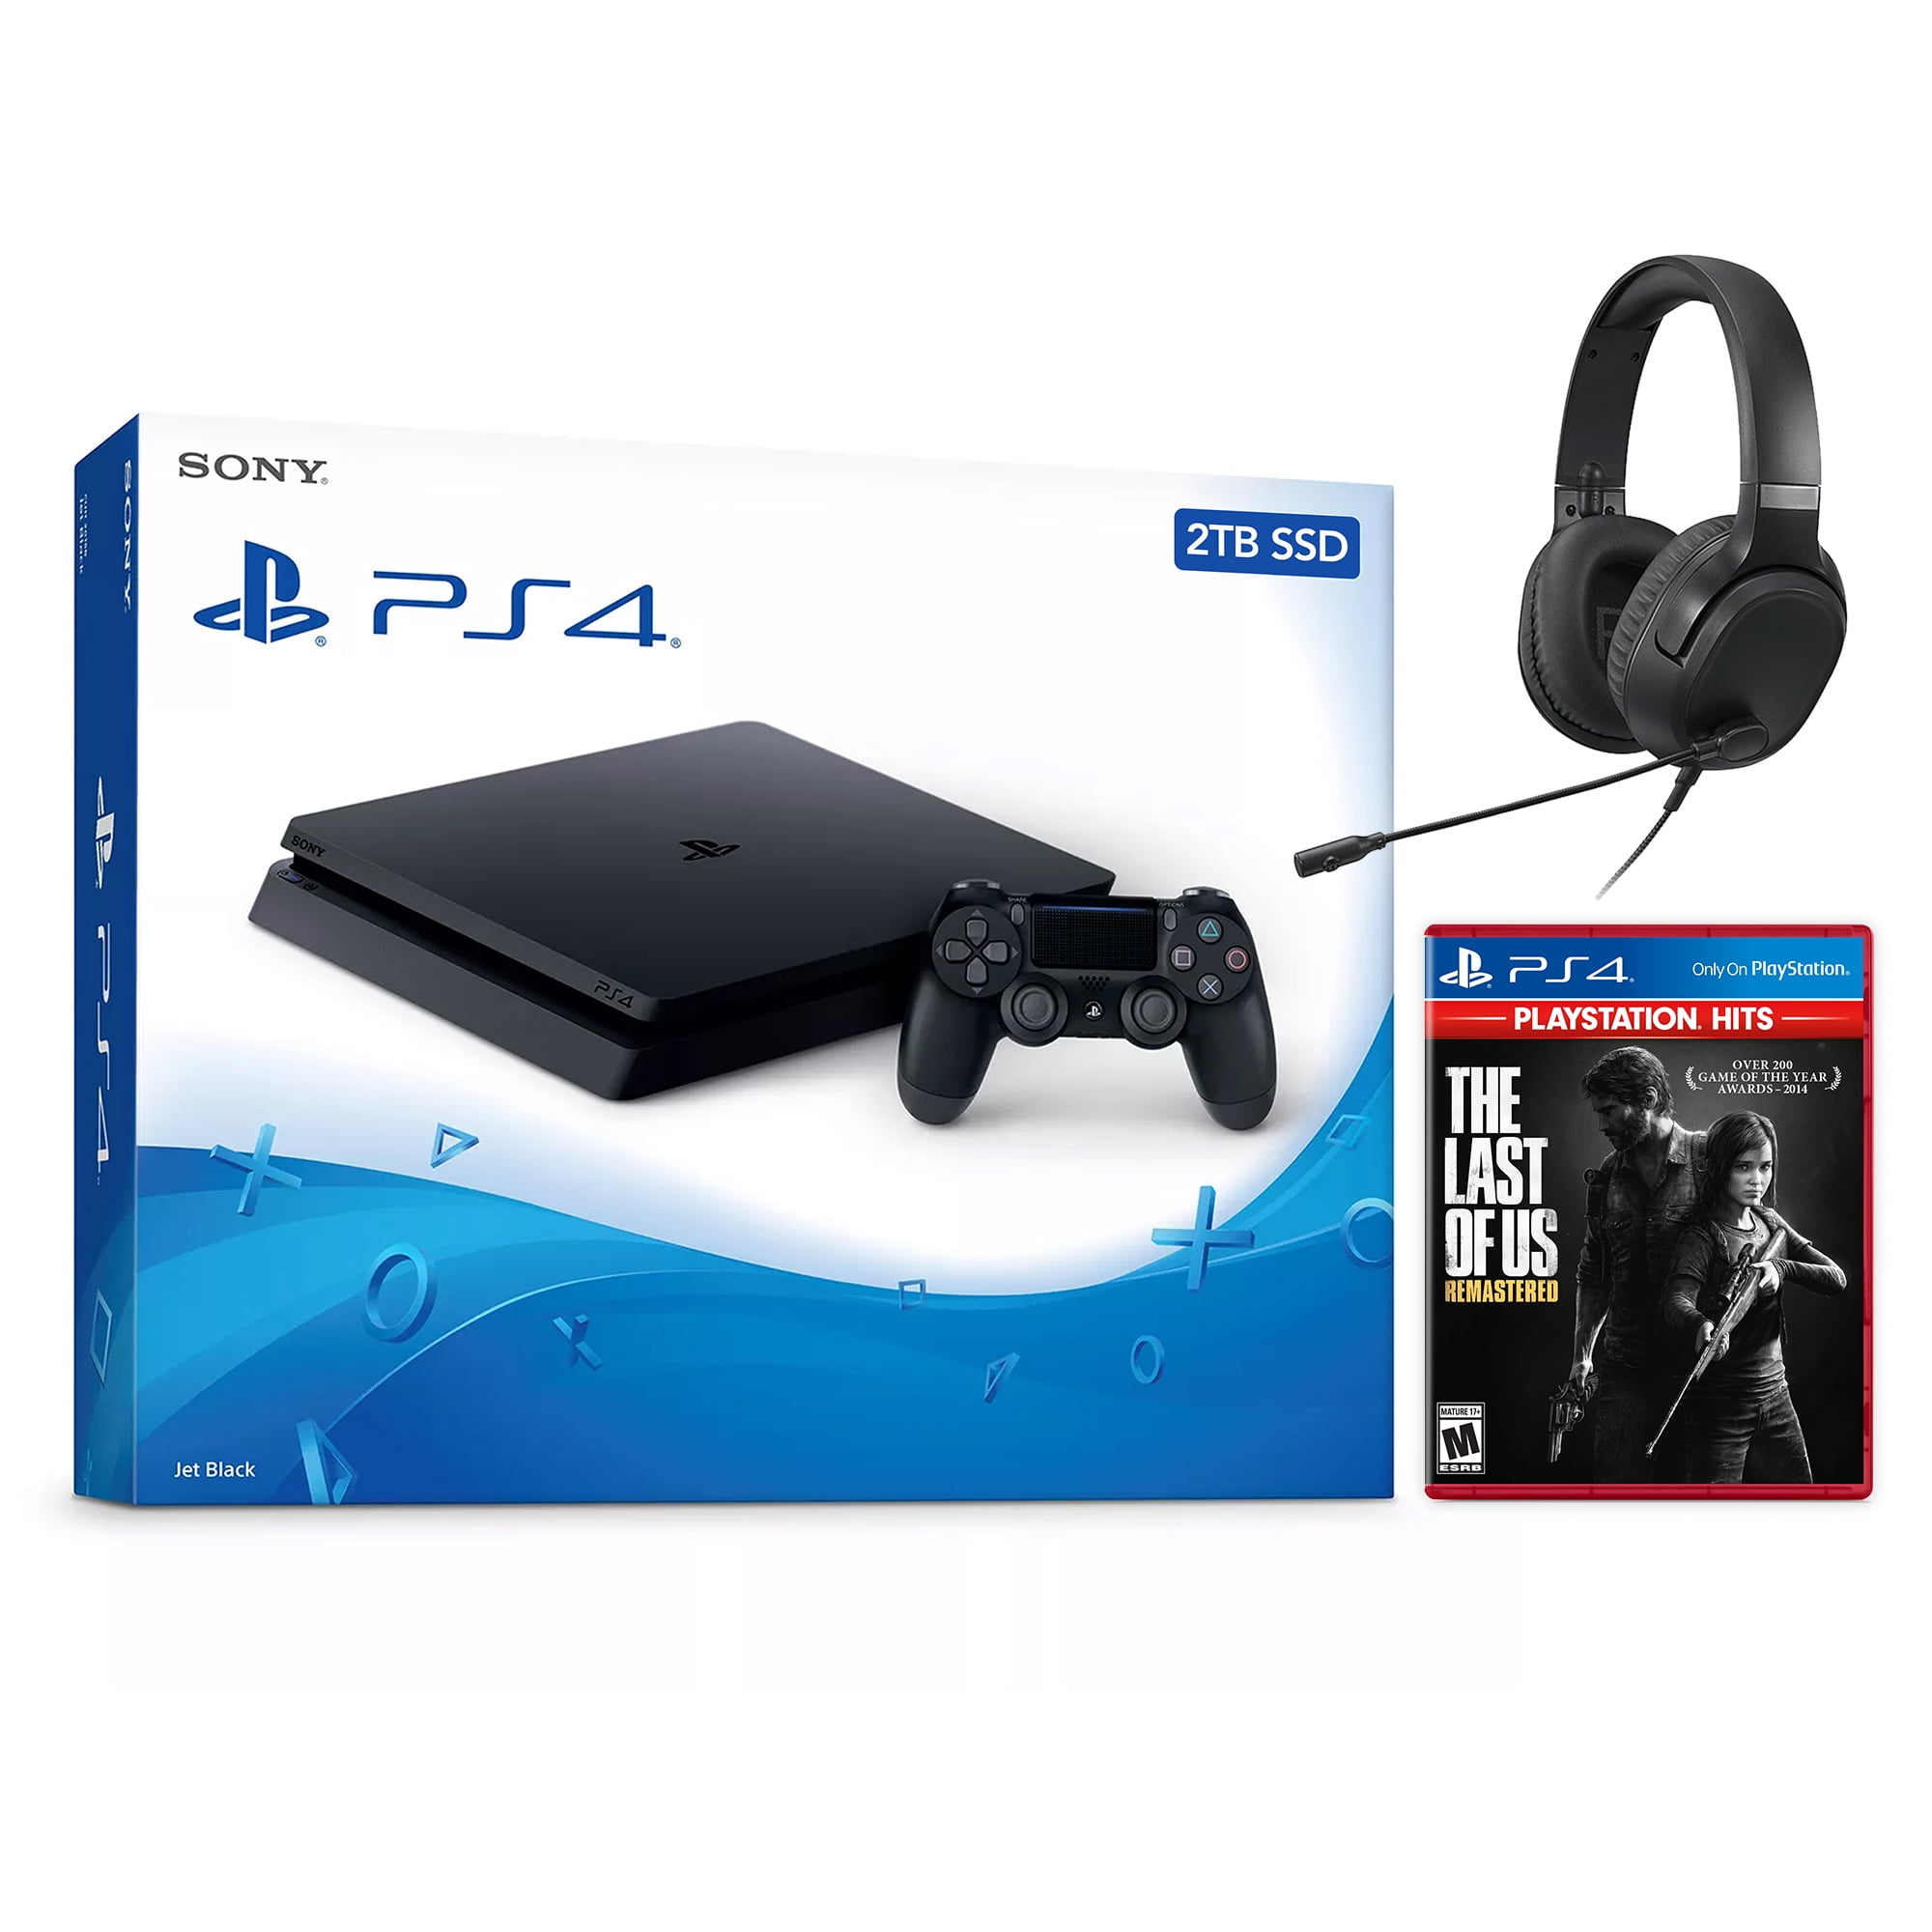 Sony PlayStation 4 Slim The Last of Us: Remastered Bundle 500GB PS4 Jet Black, with Mytrix Chat Headset - Walmart.com